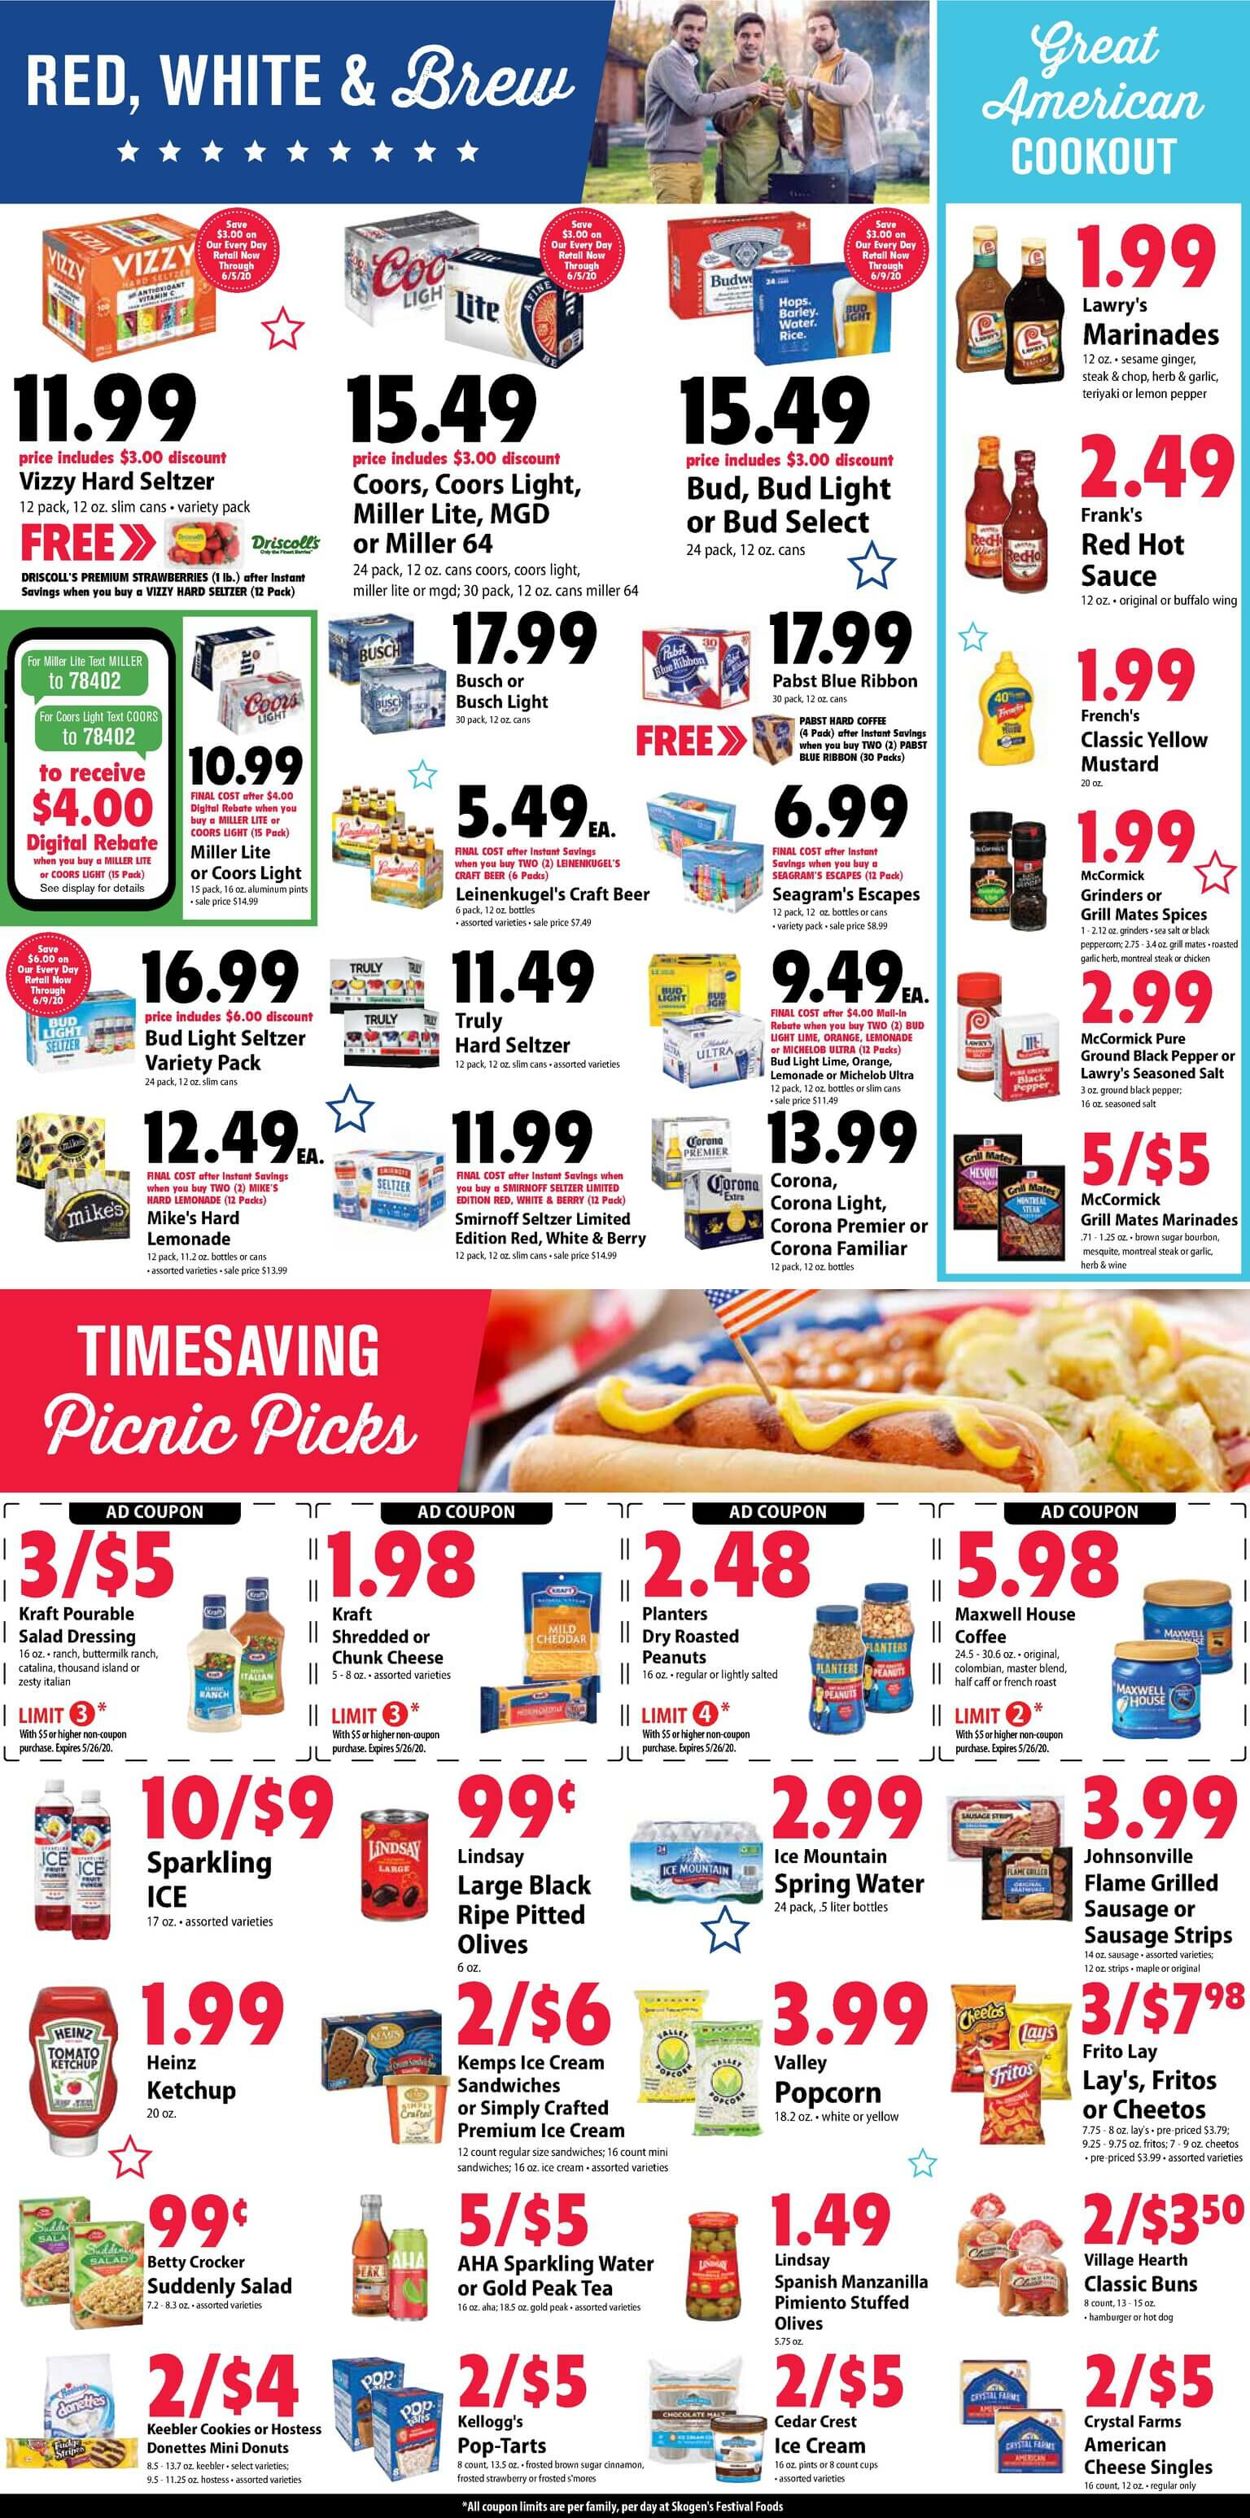 Festival Foods Ad from 05/20/2020